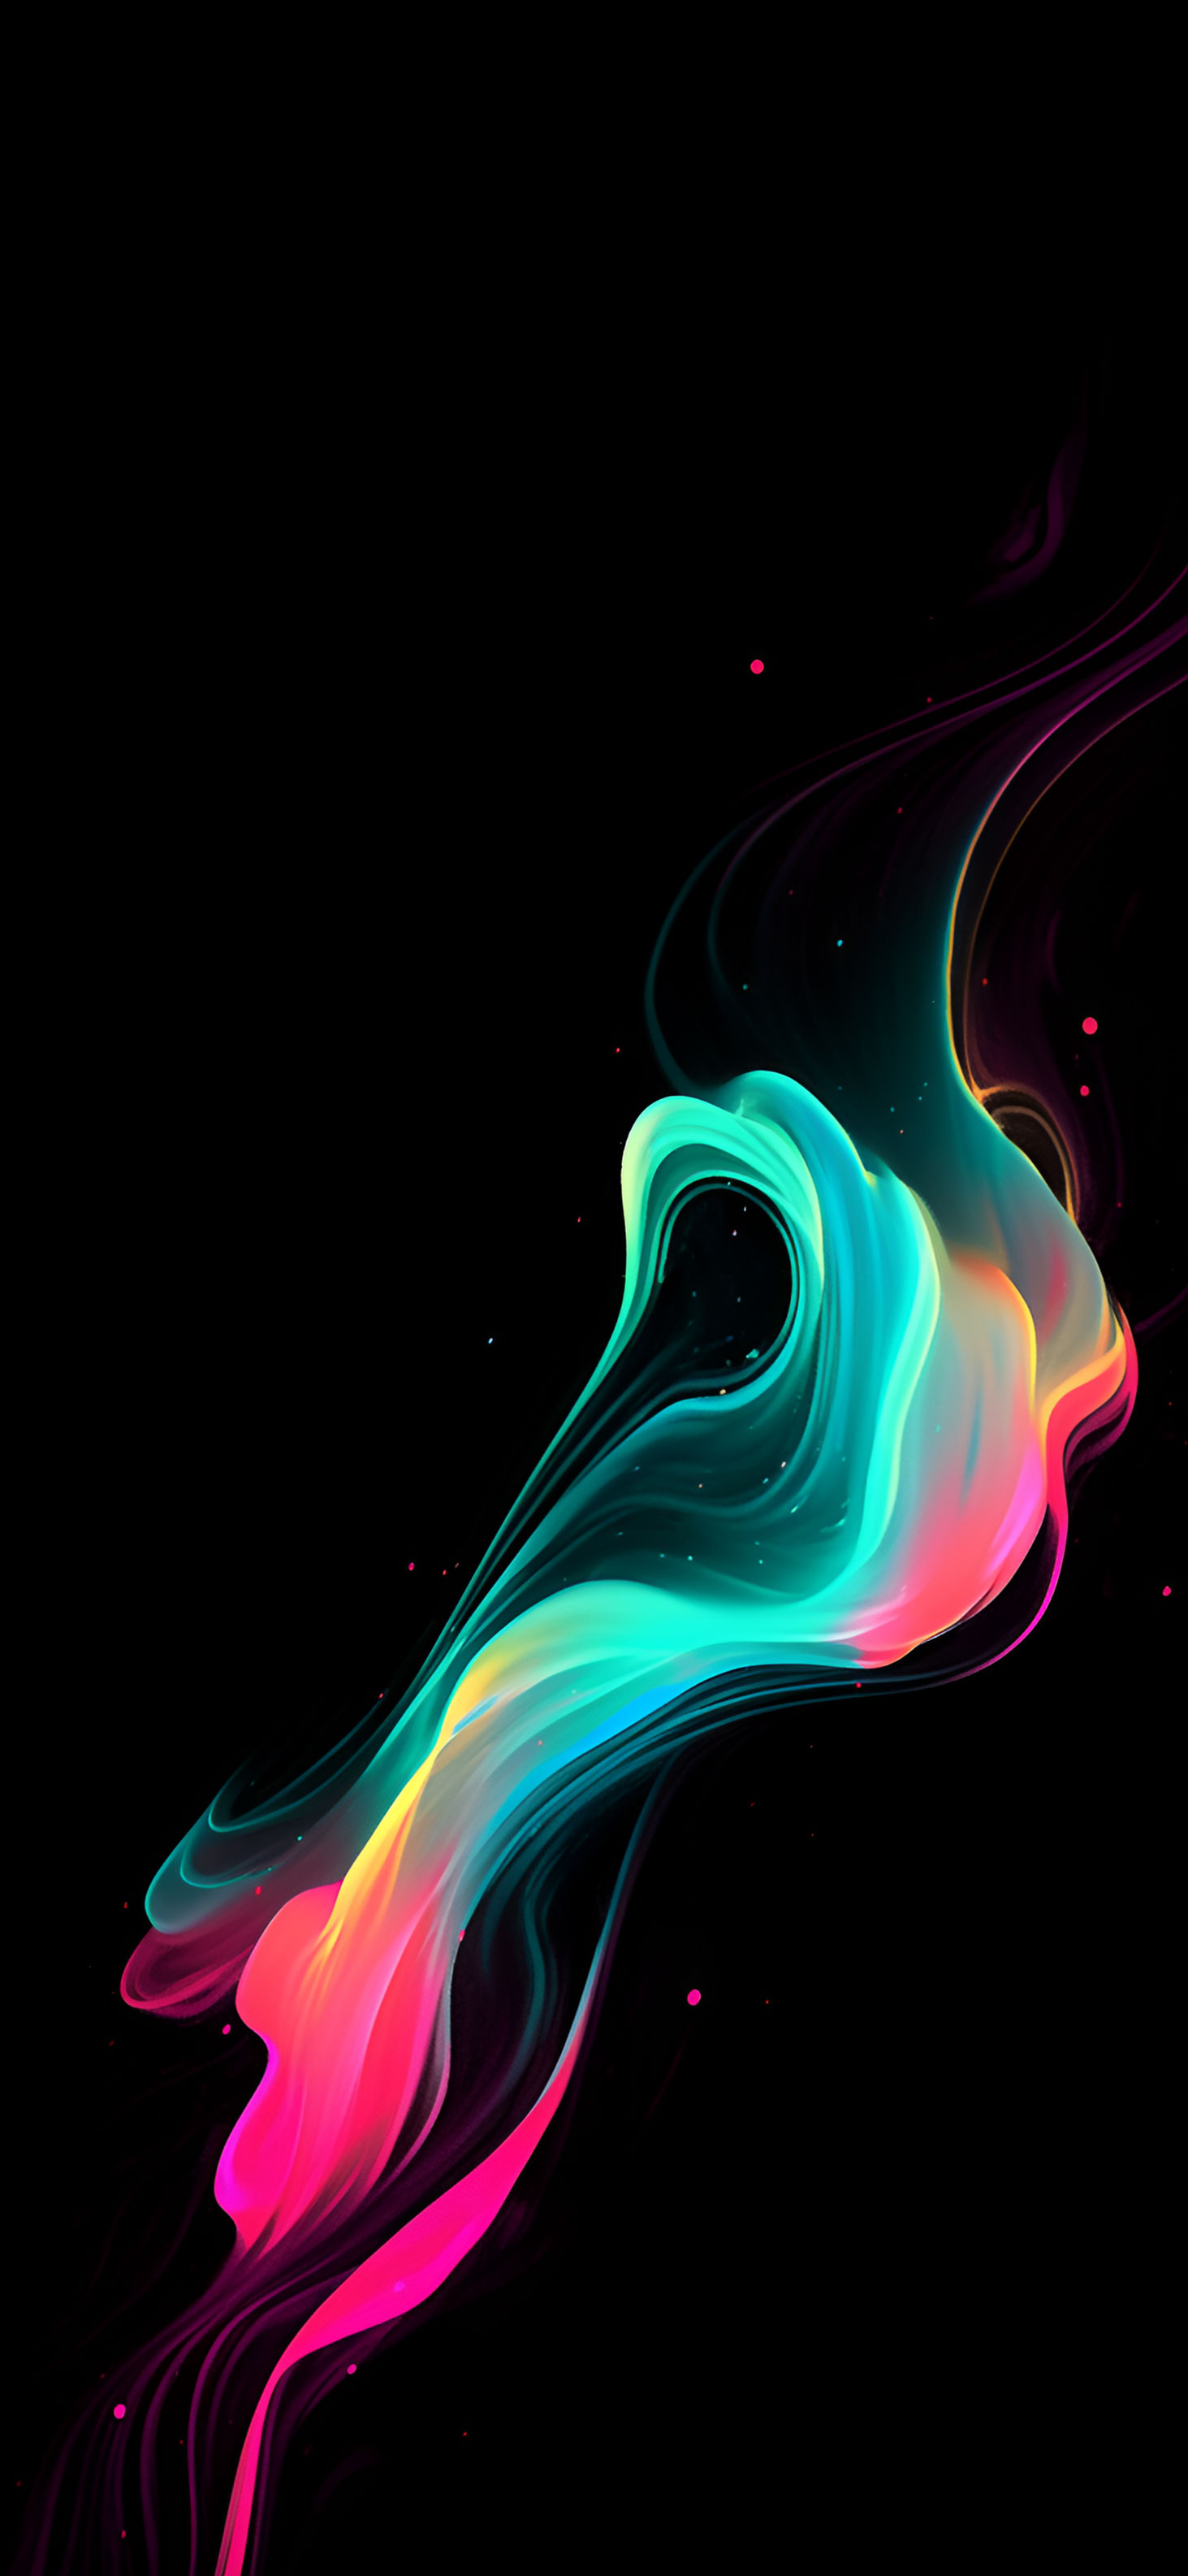 Black Amoled 4K Wallpapers - Black Abstract Wallpapers for iPhone